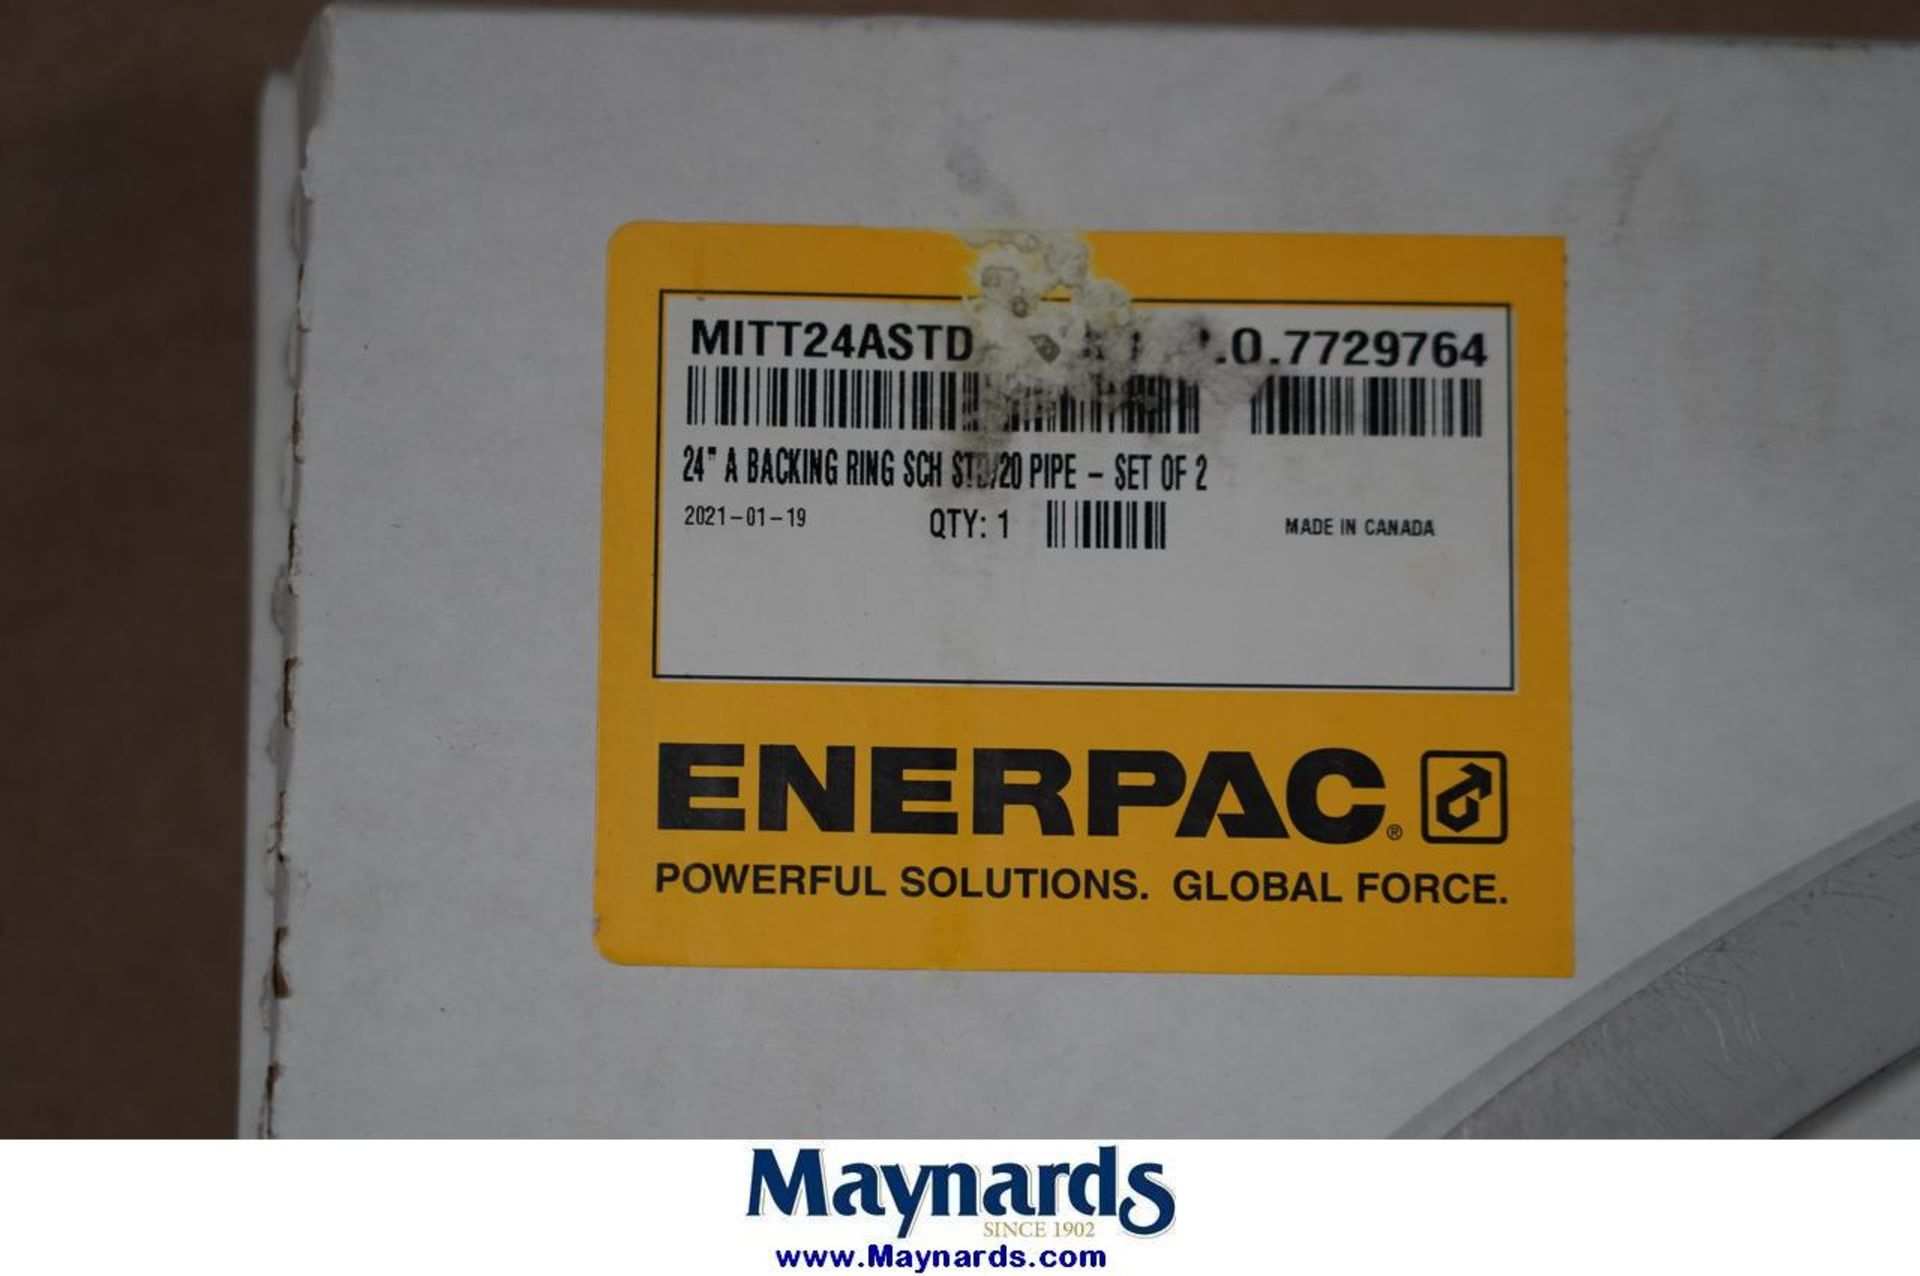 Enerpac MITT 24A STD 24" A Backing Ring SCH STD/20 Pipe - Image 3 of 4